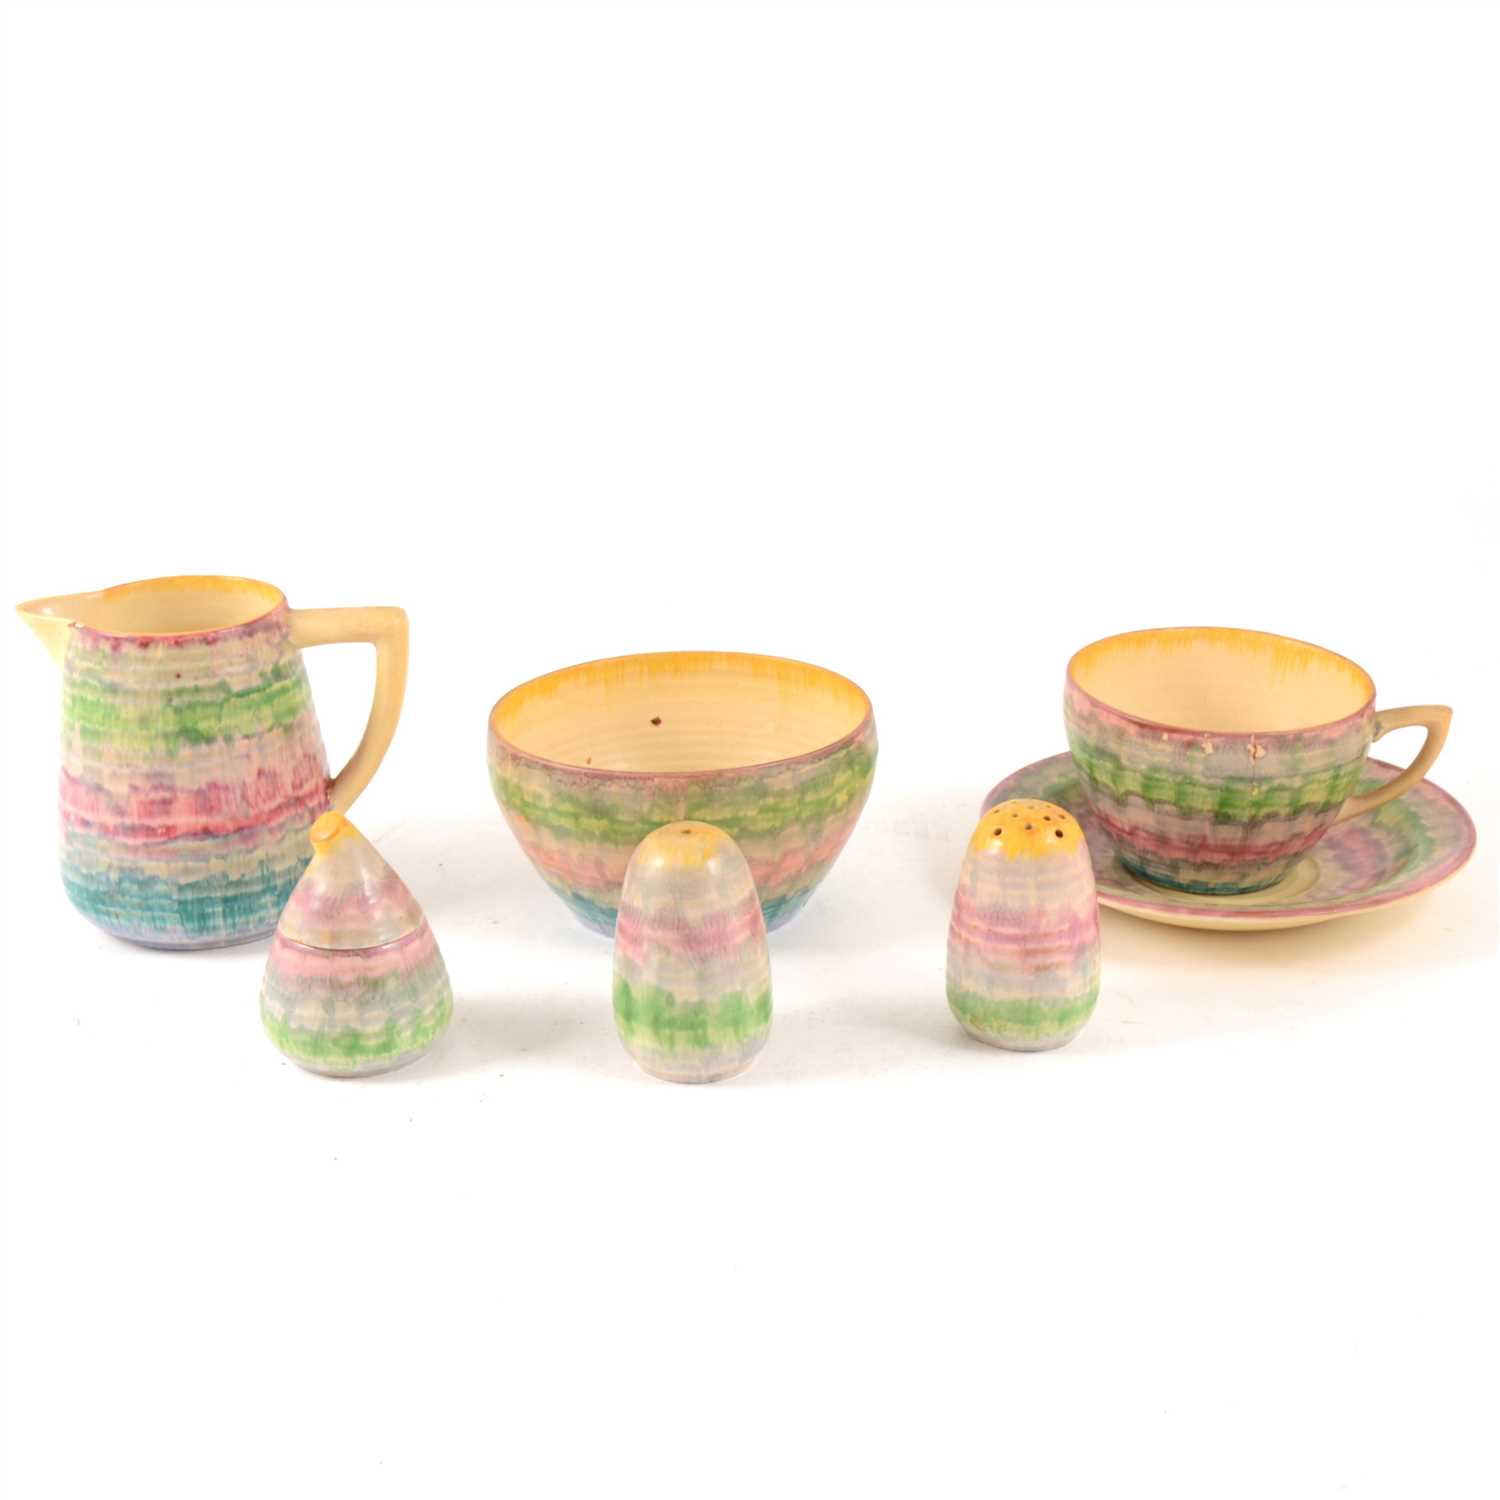 Lot 11 - A 'Delecia' pattern part tea set for six by Clarice Cliff, some damages